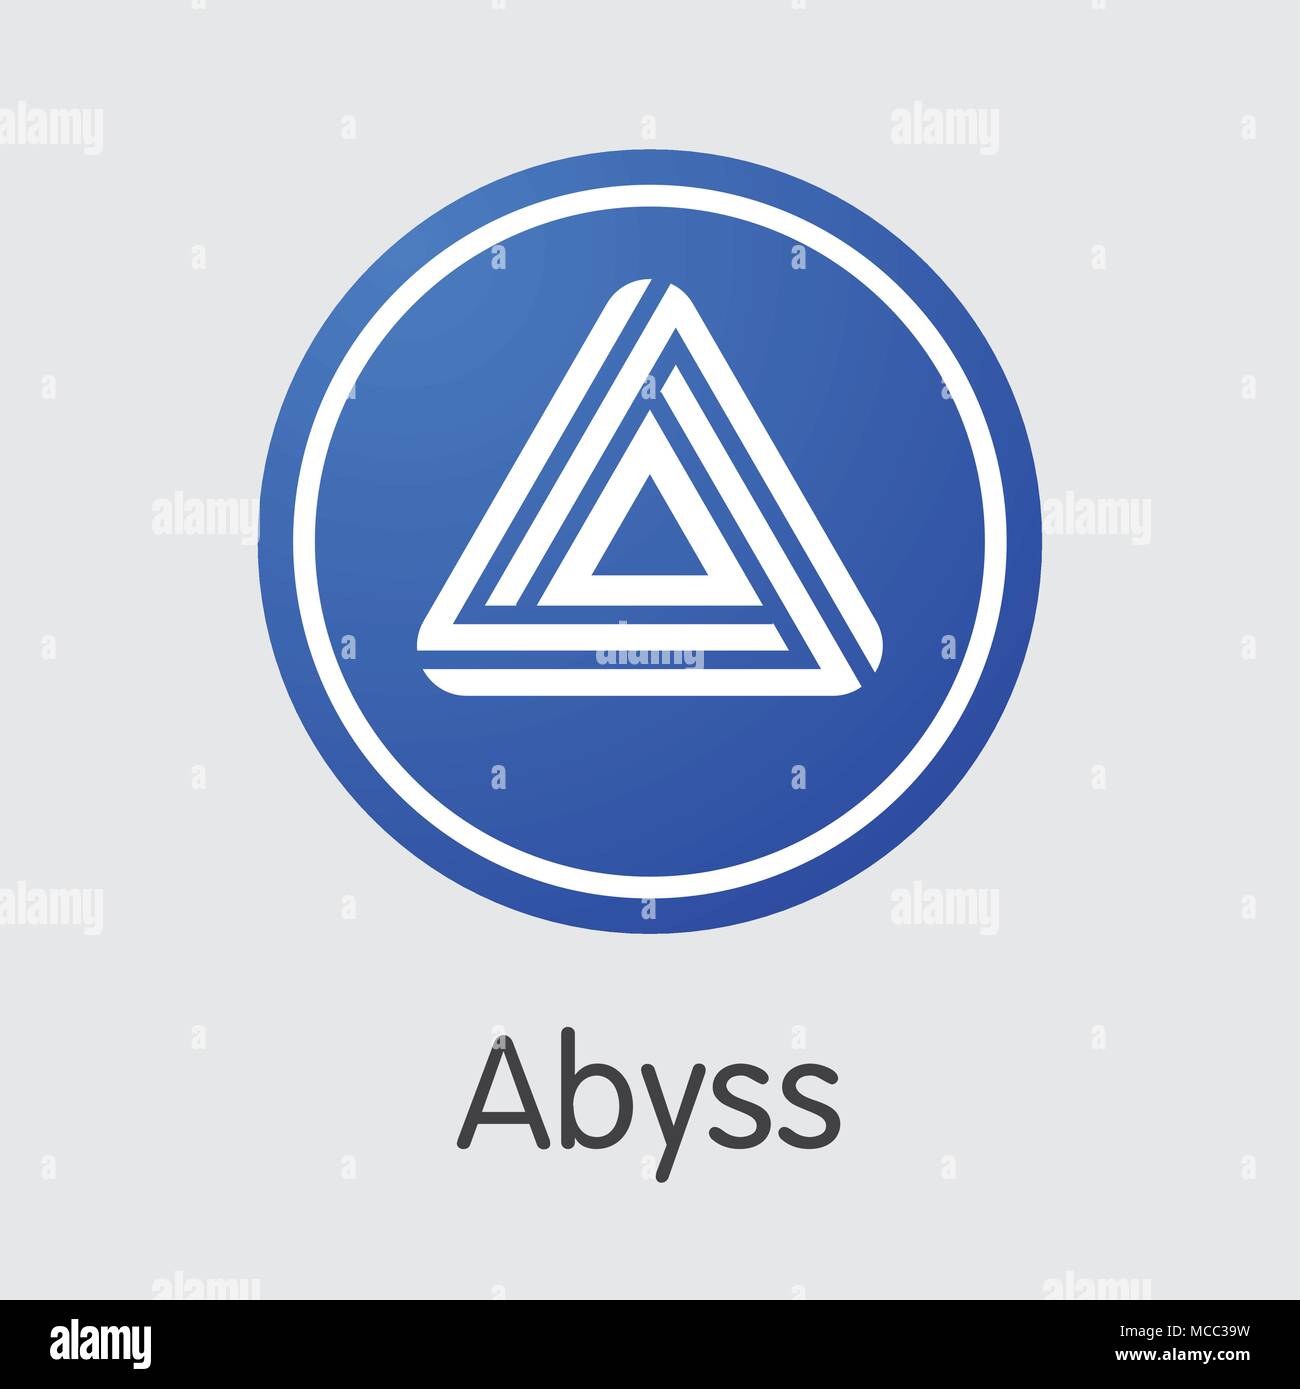 Abyss - Cryptocurrency Logo. Stock Vector